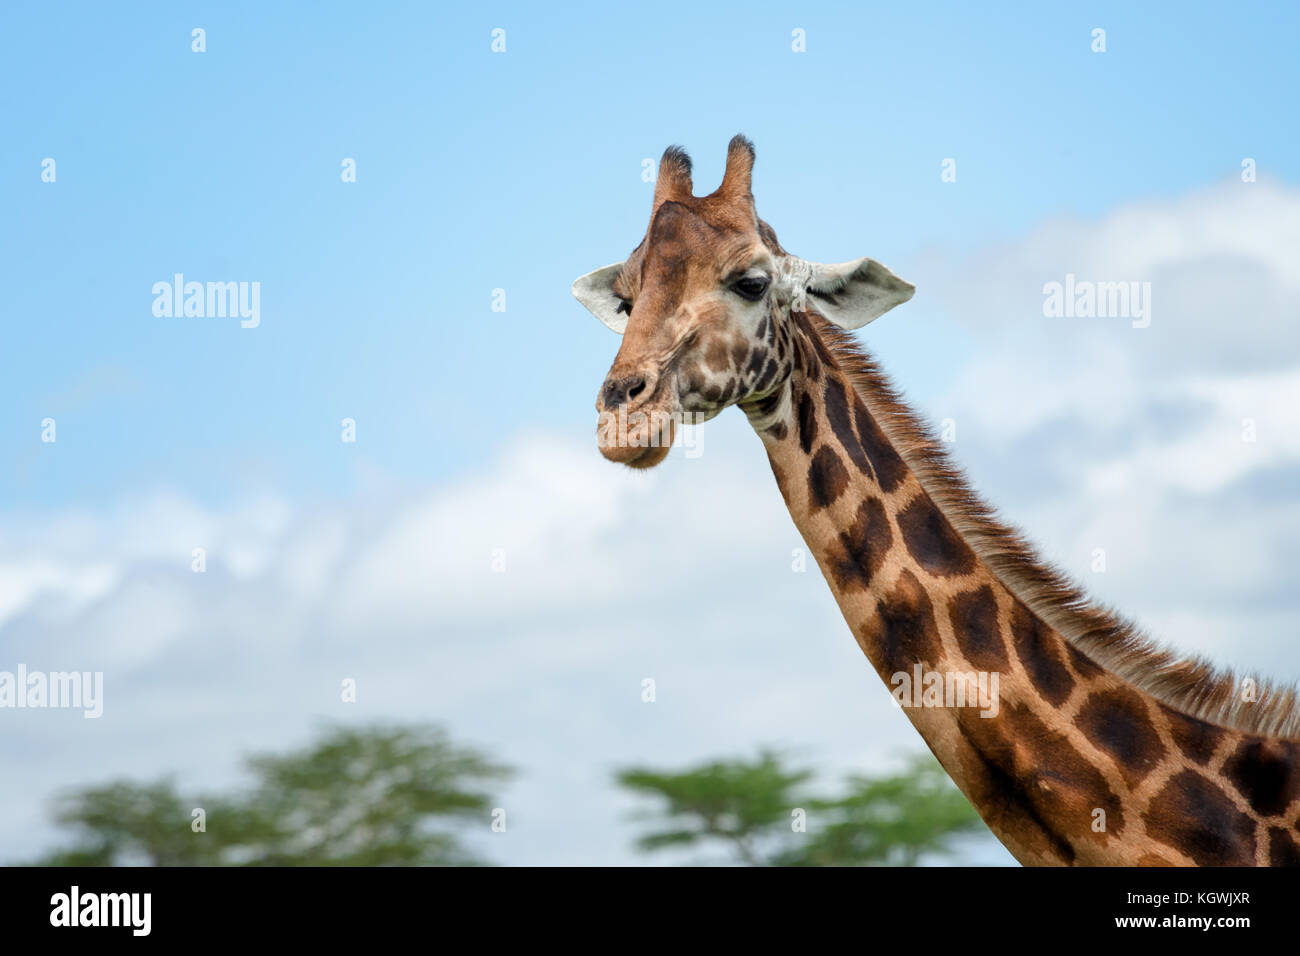 Head and neck of a giraffe looking into camera against a blue sky. Stock Photo